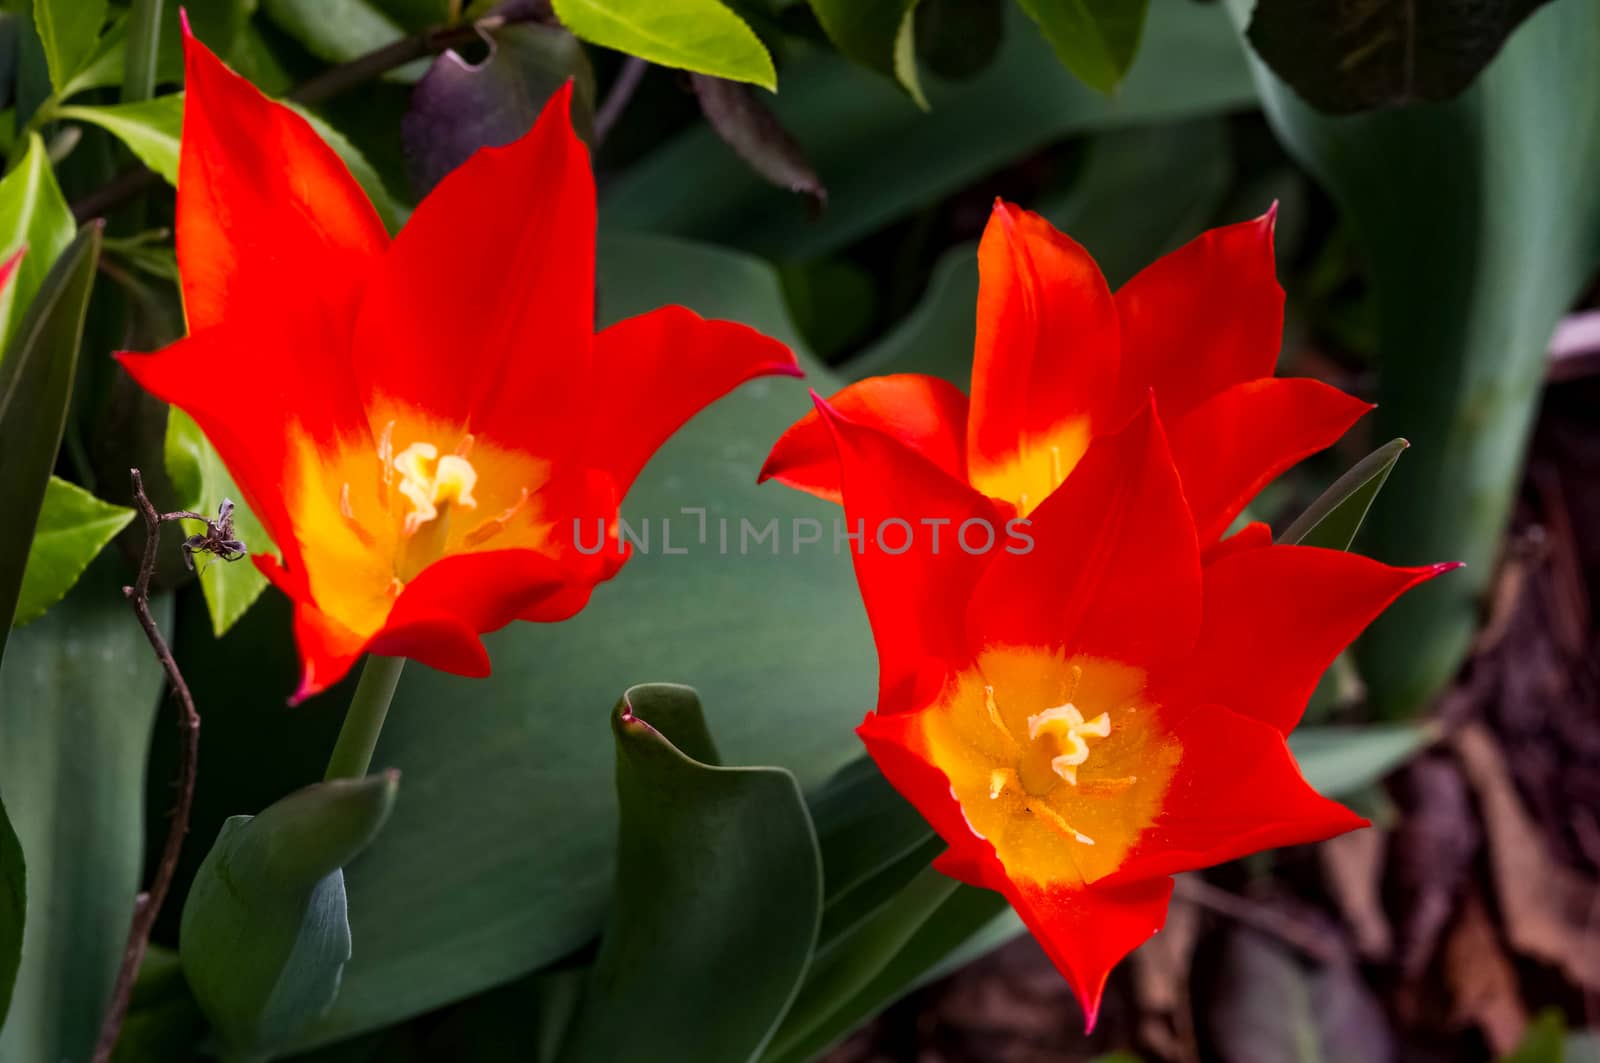 Three yellow and orange tulips in a garden.